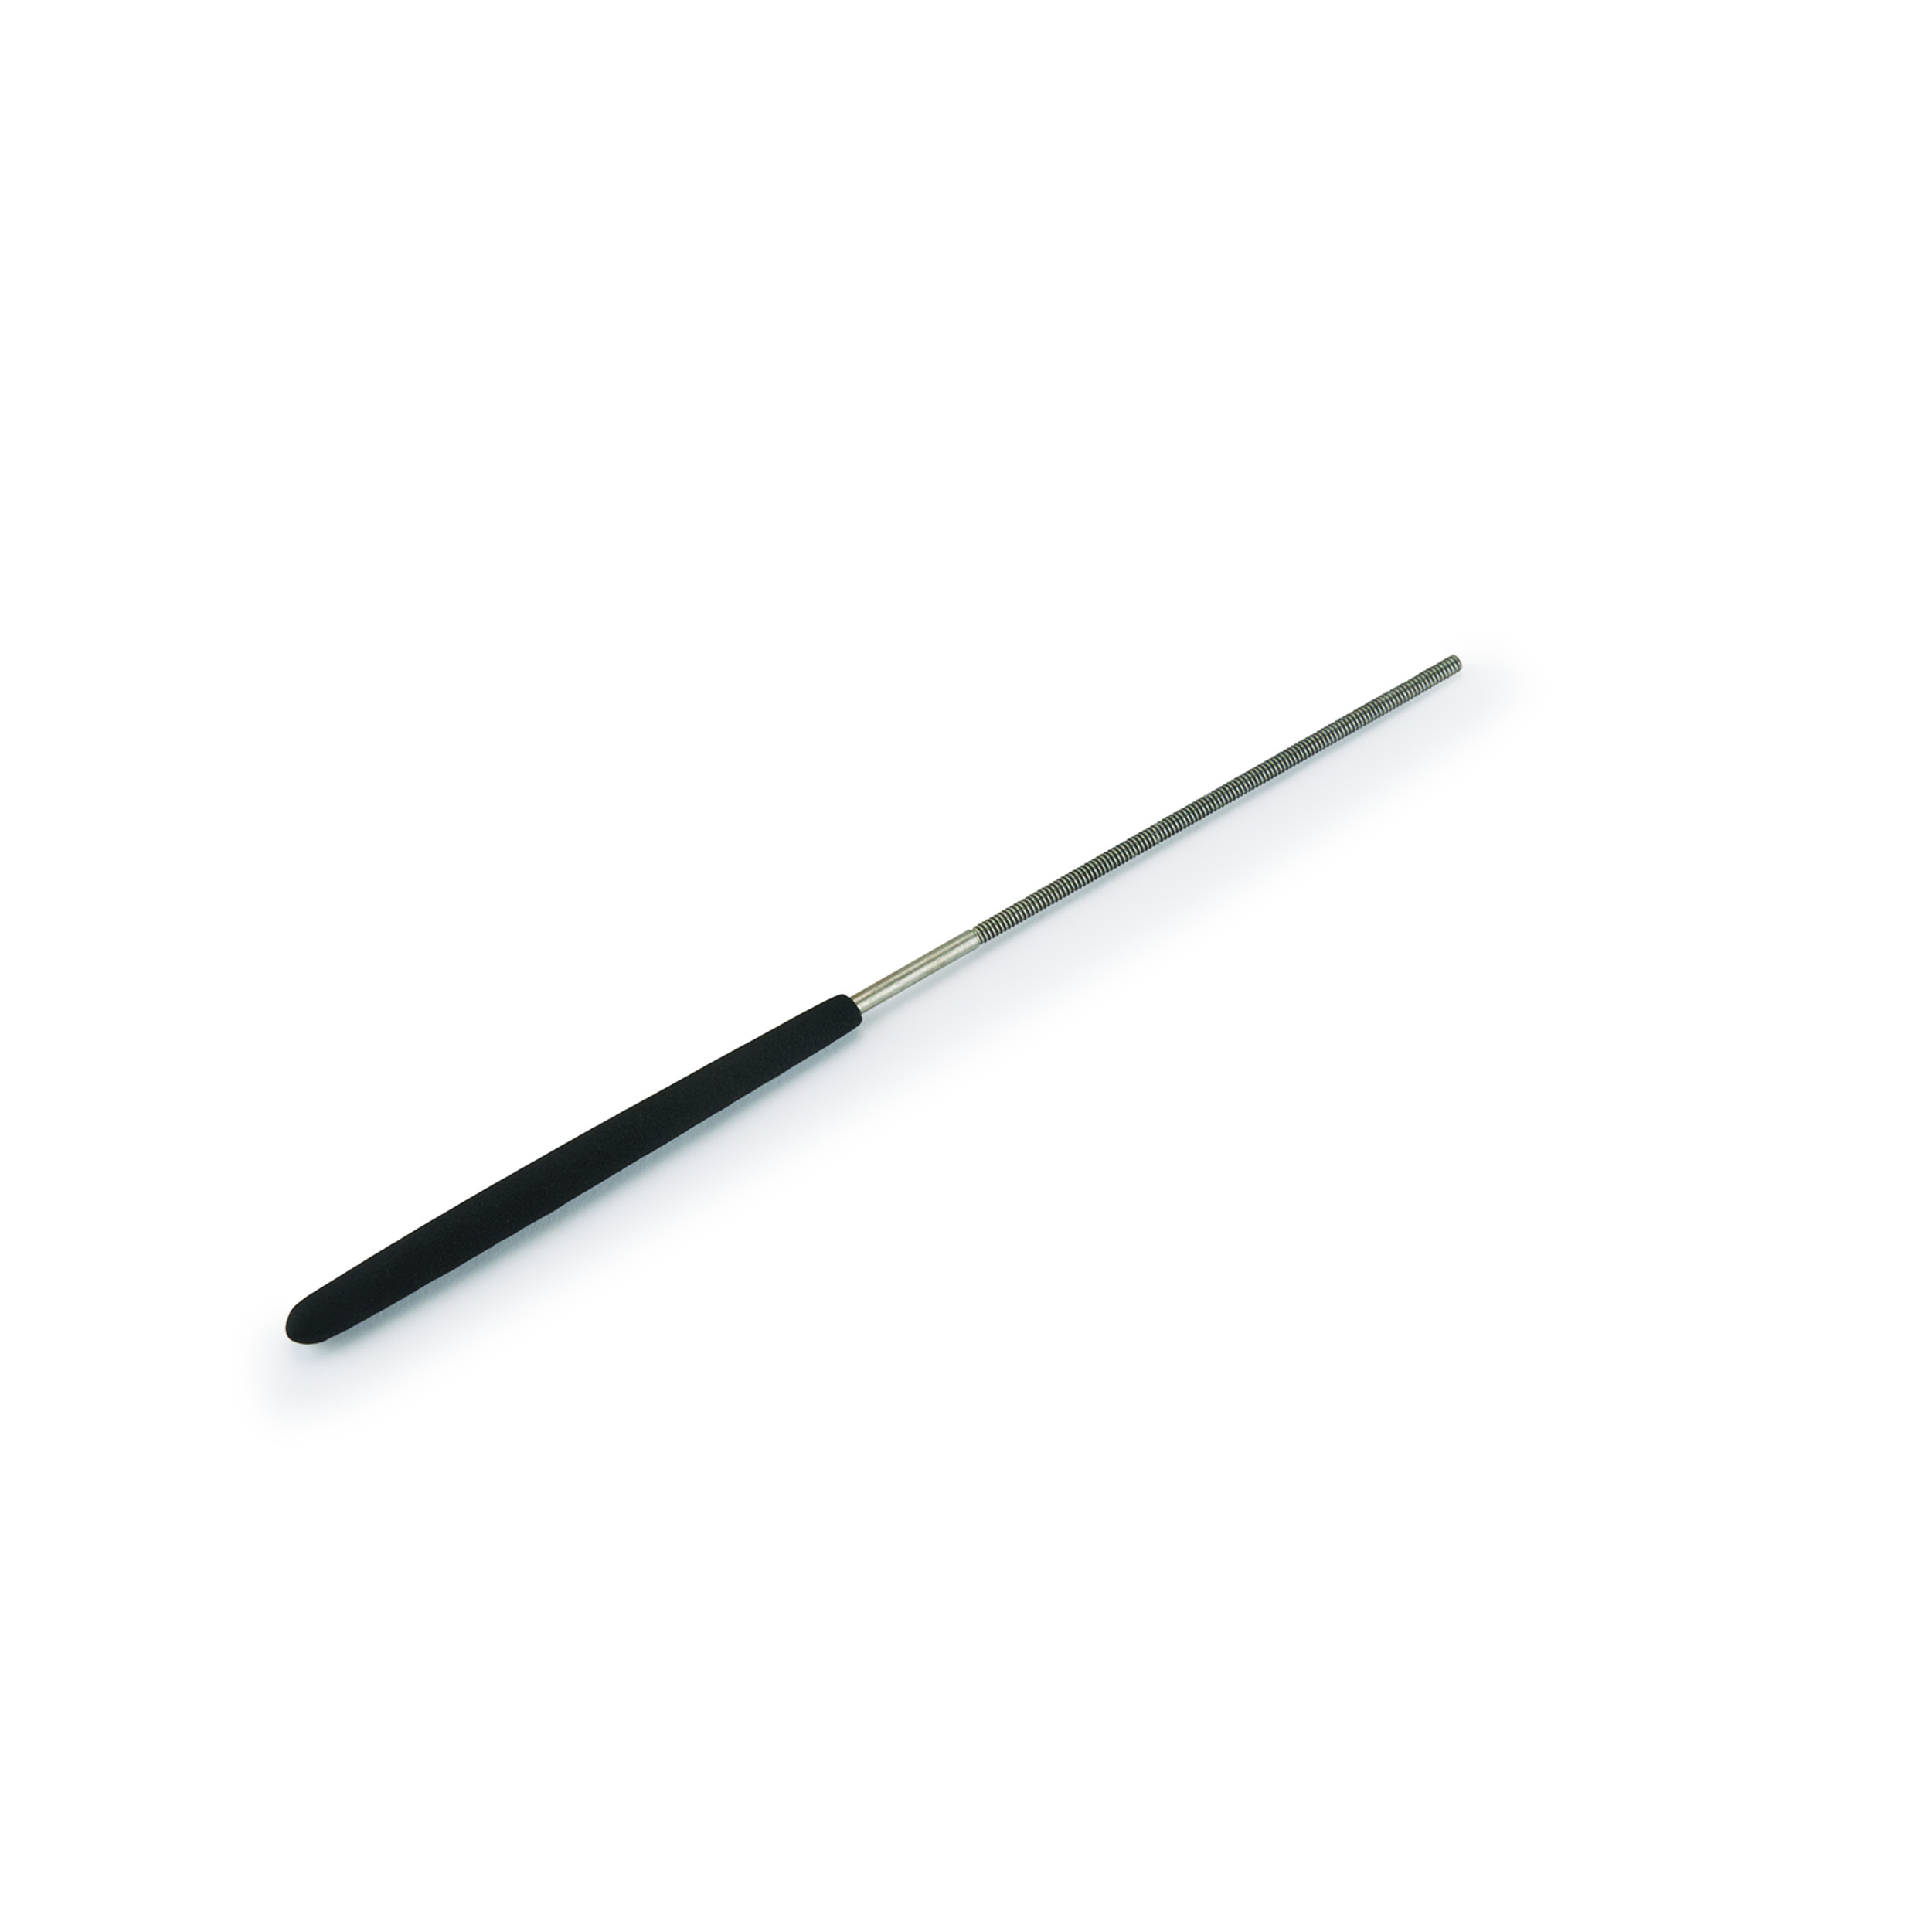 3.5in 3mm Dia. Round File, Extra Fine Cut With Handle